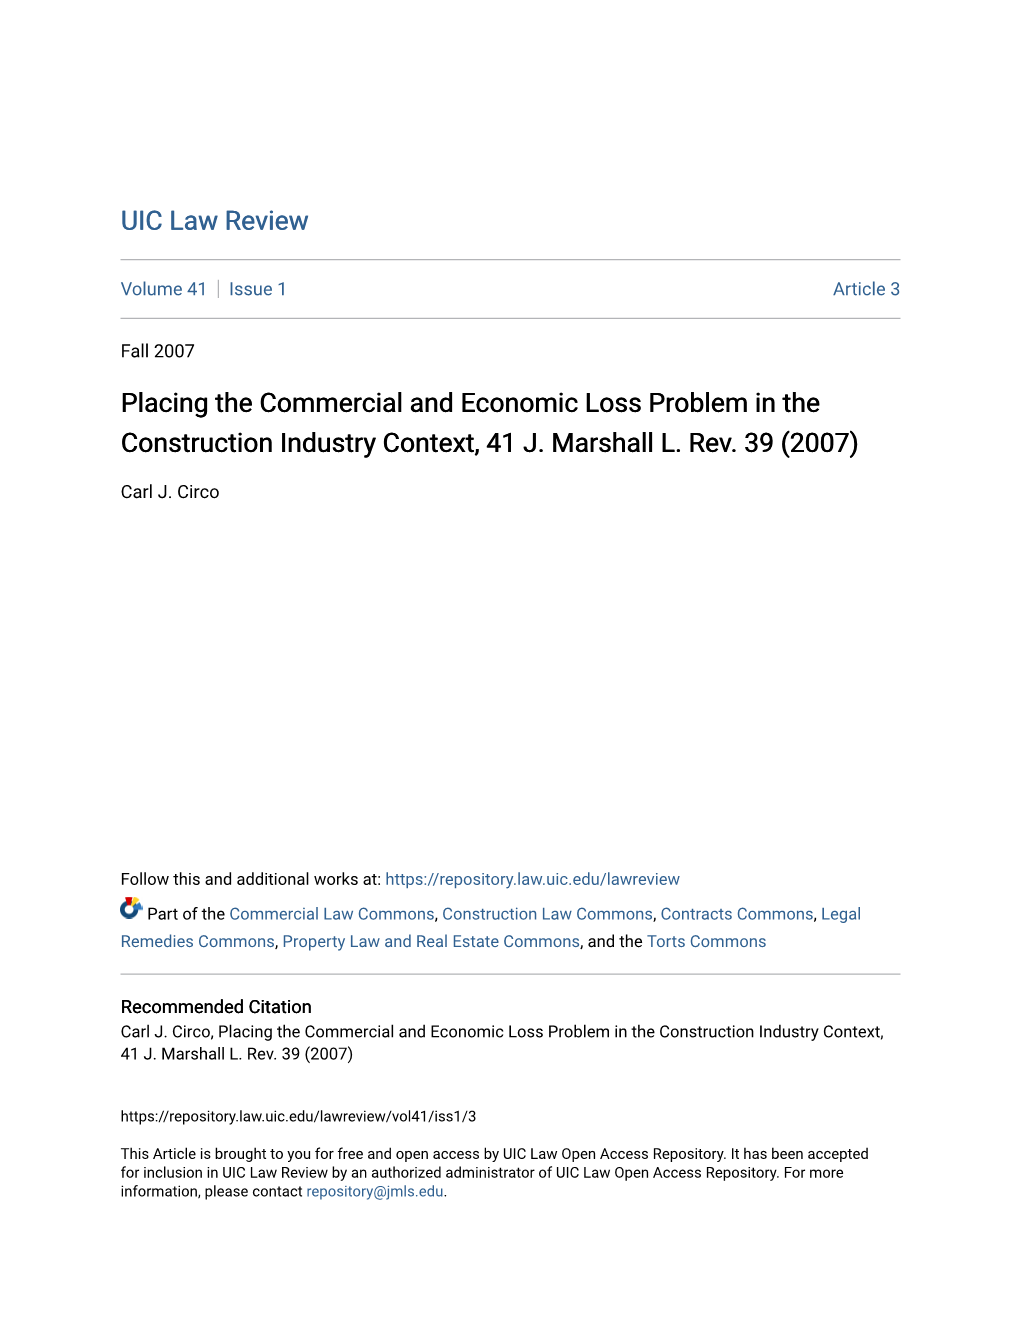 Placing the Commercial and Economic Loss Problem in the Construction Industry Context, 41 J